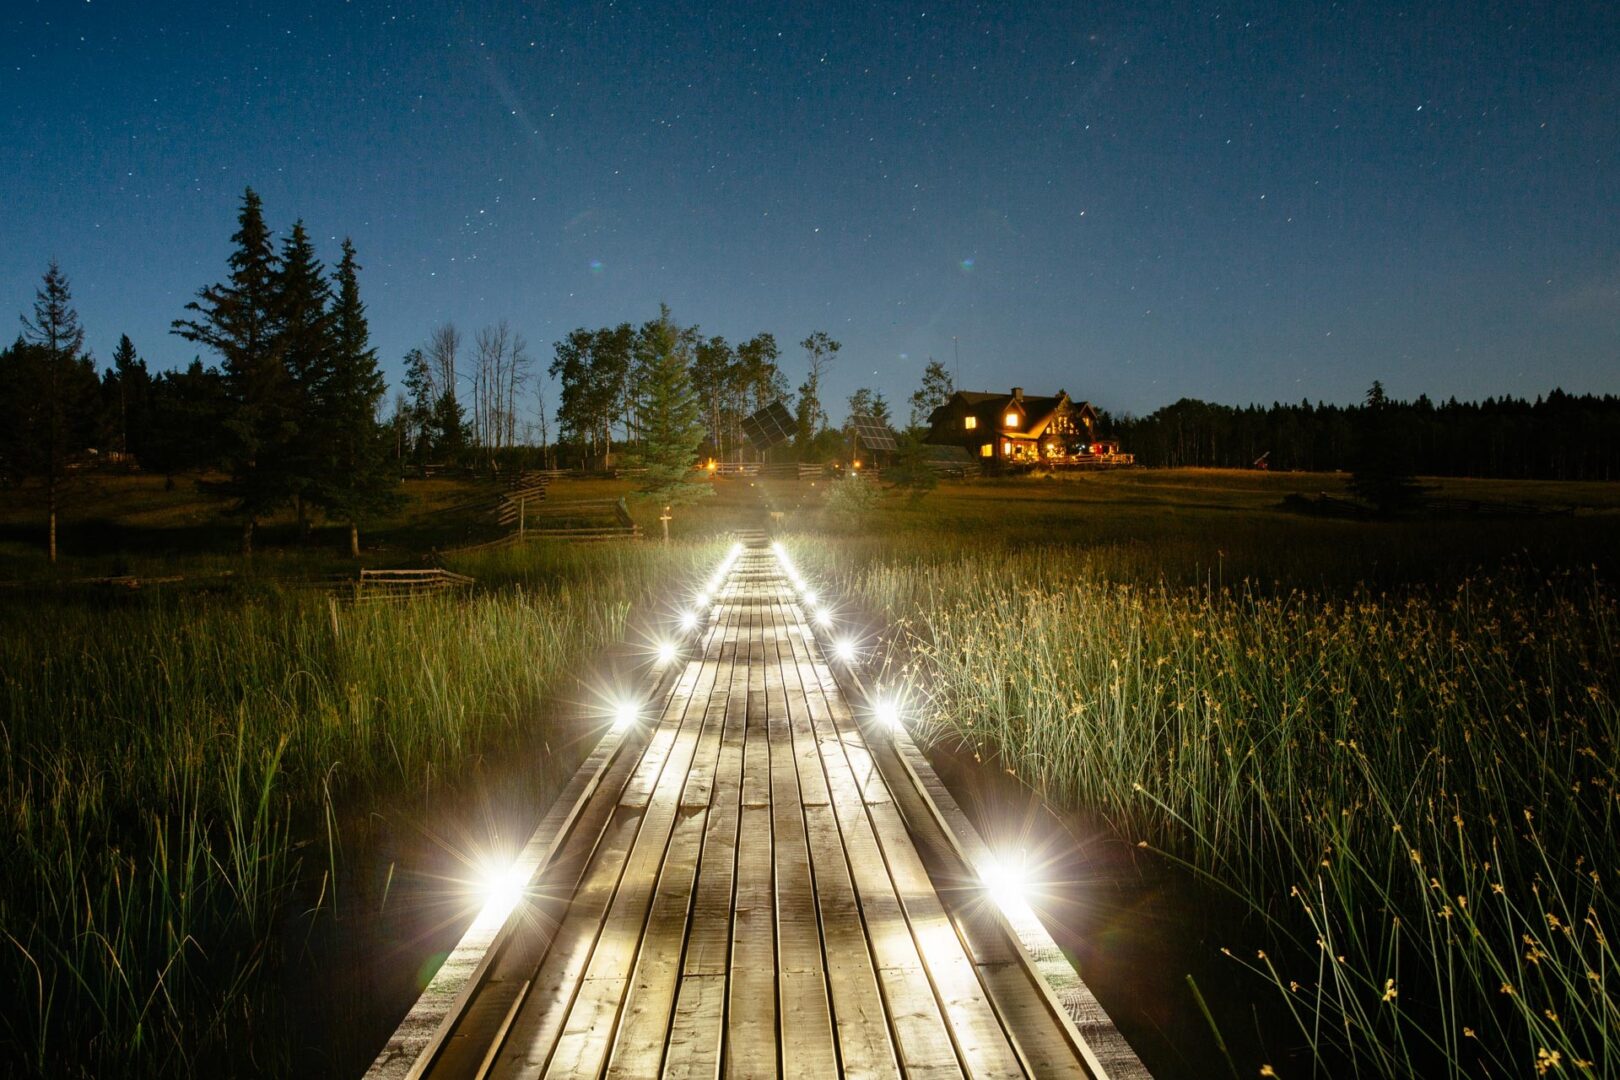 This stunning walkway leading through the grasslands at Siwash Lake. What an amazing pathway to start or end your day. Photo credit: Siwash Lake.